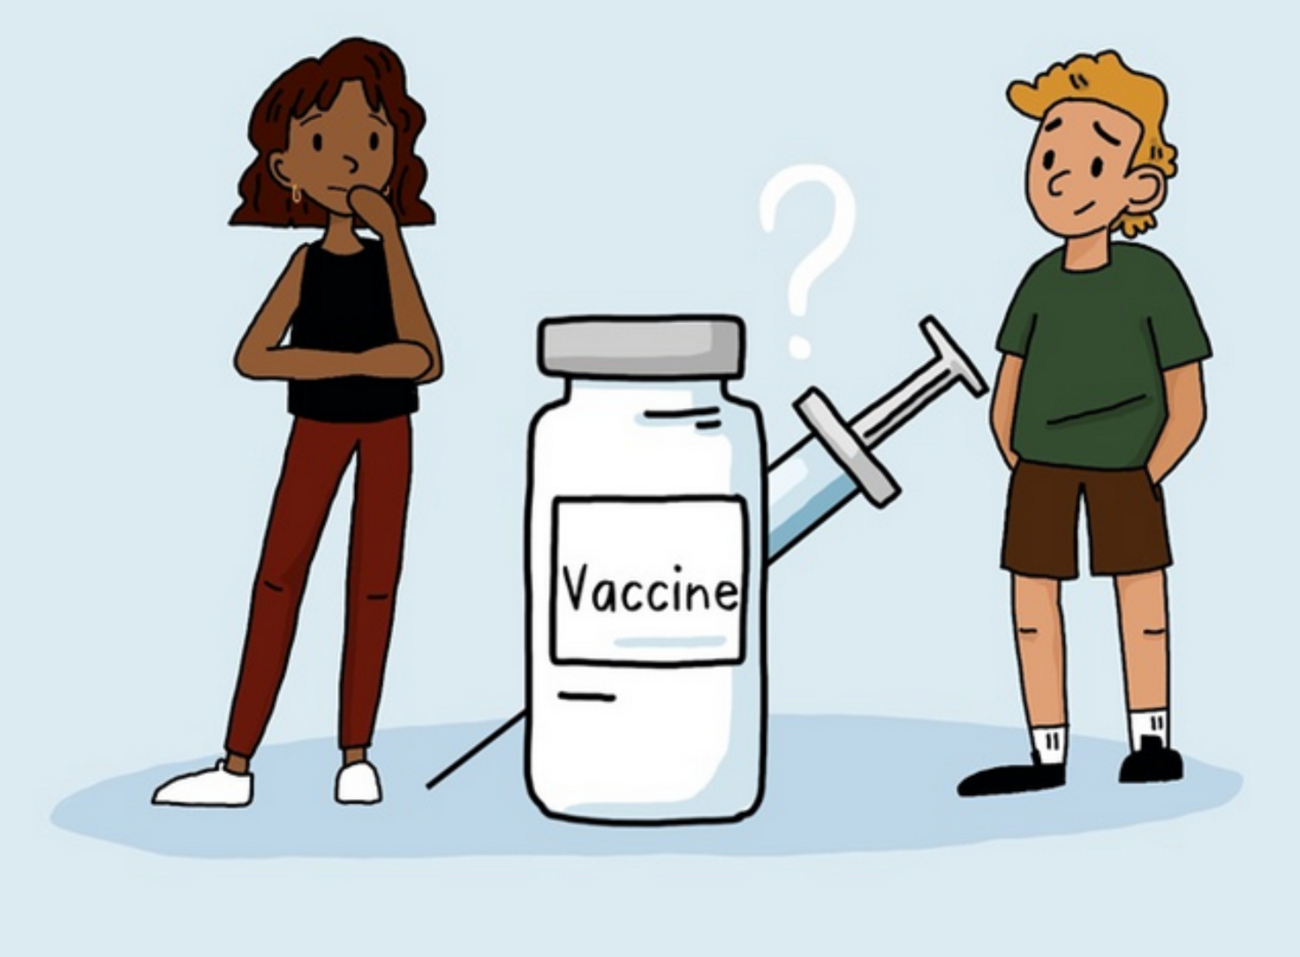 How to talk about vaccines